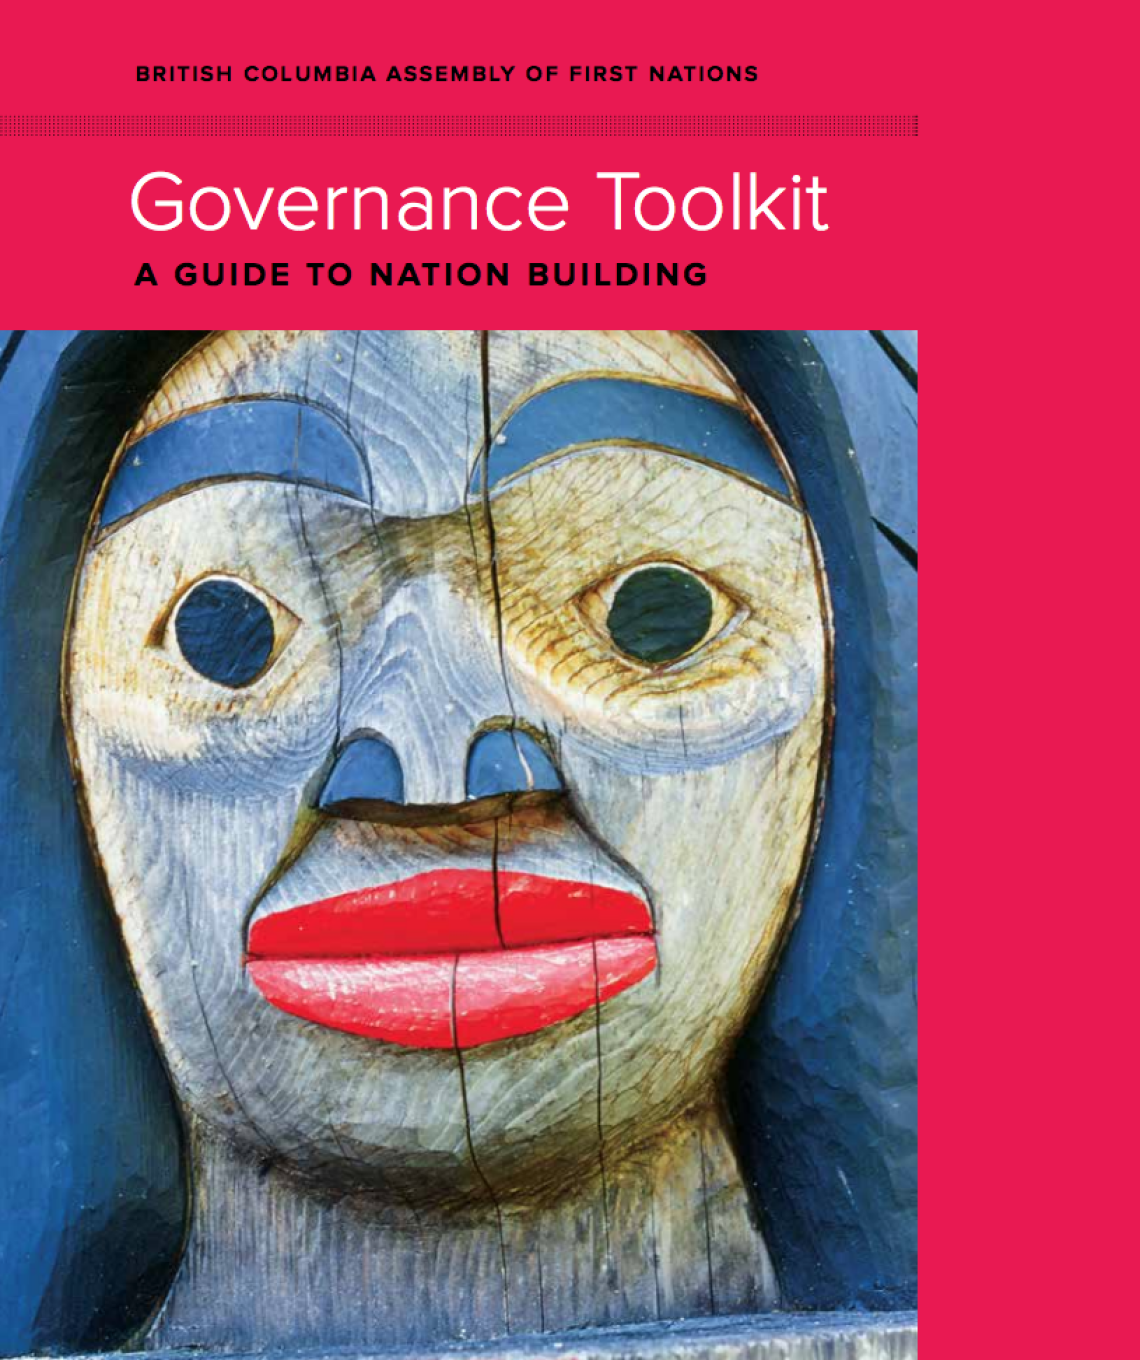 British Columbia Assembly of First Nations Governance Toolkit: A Guide to Nation Building